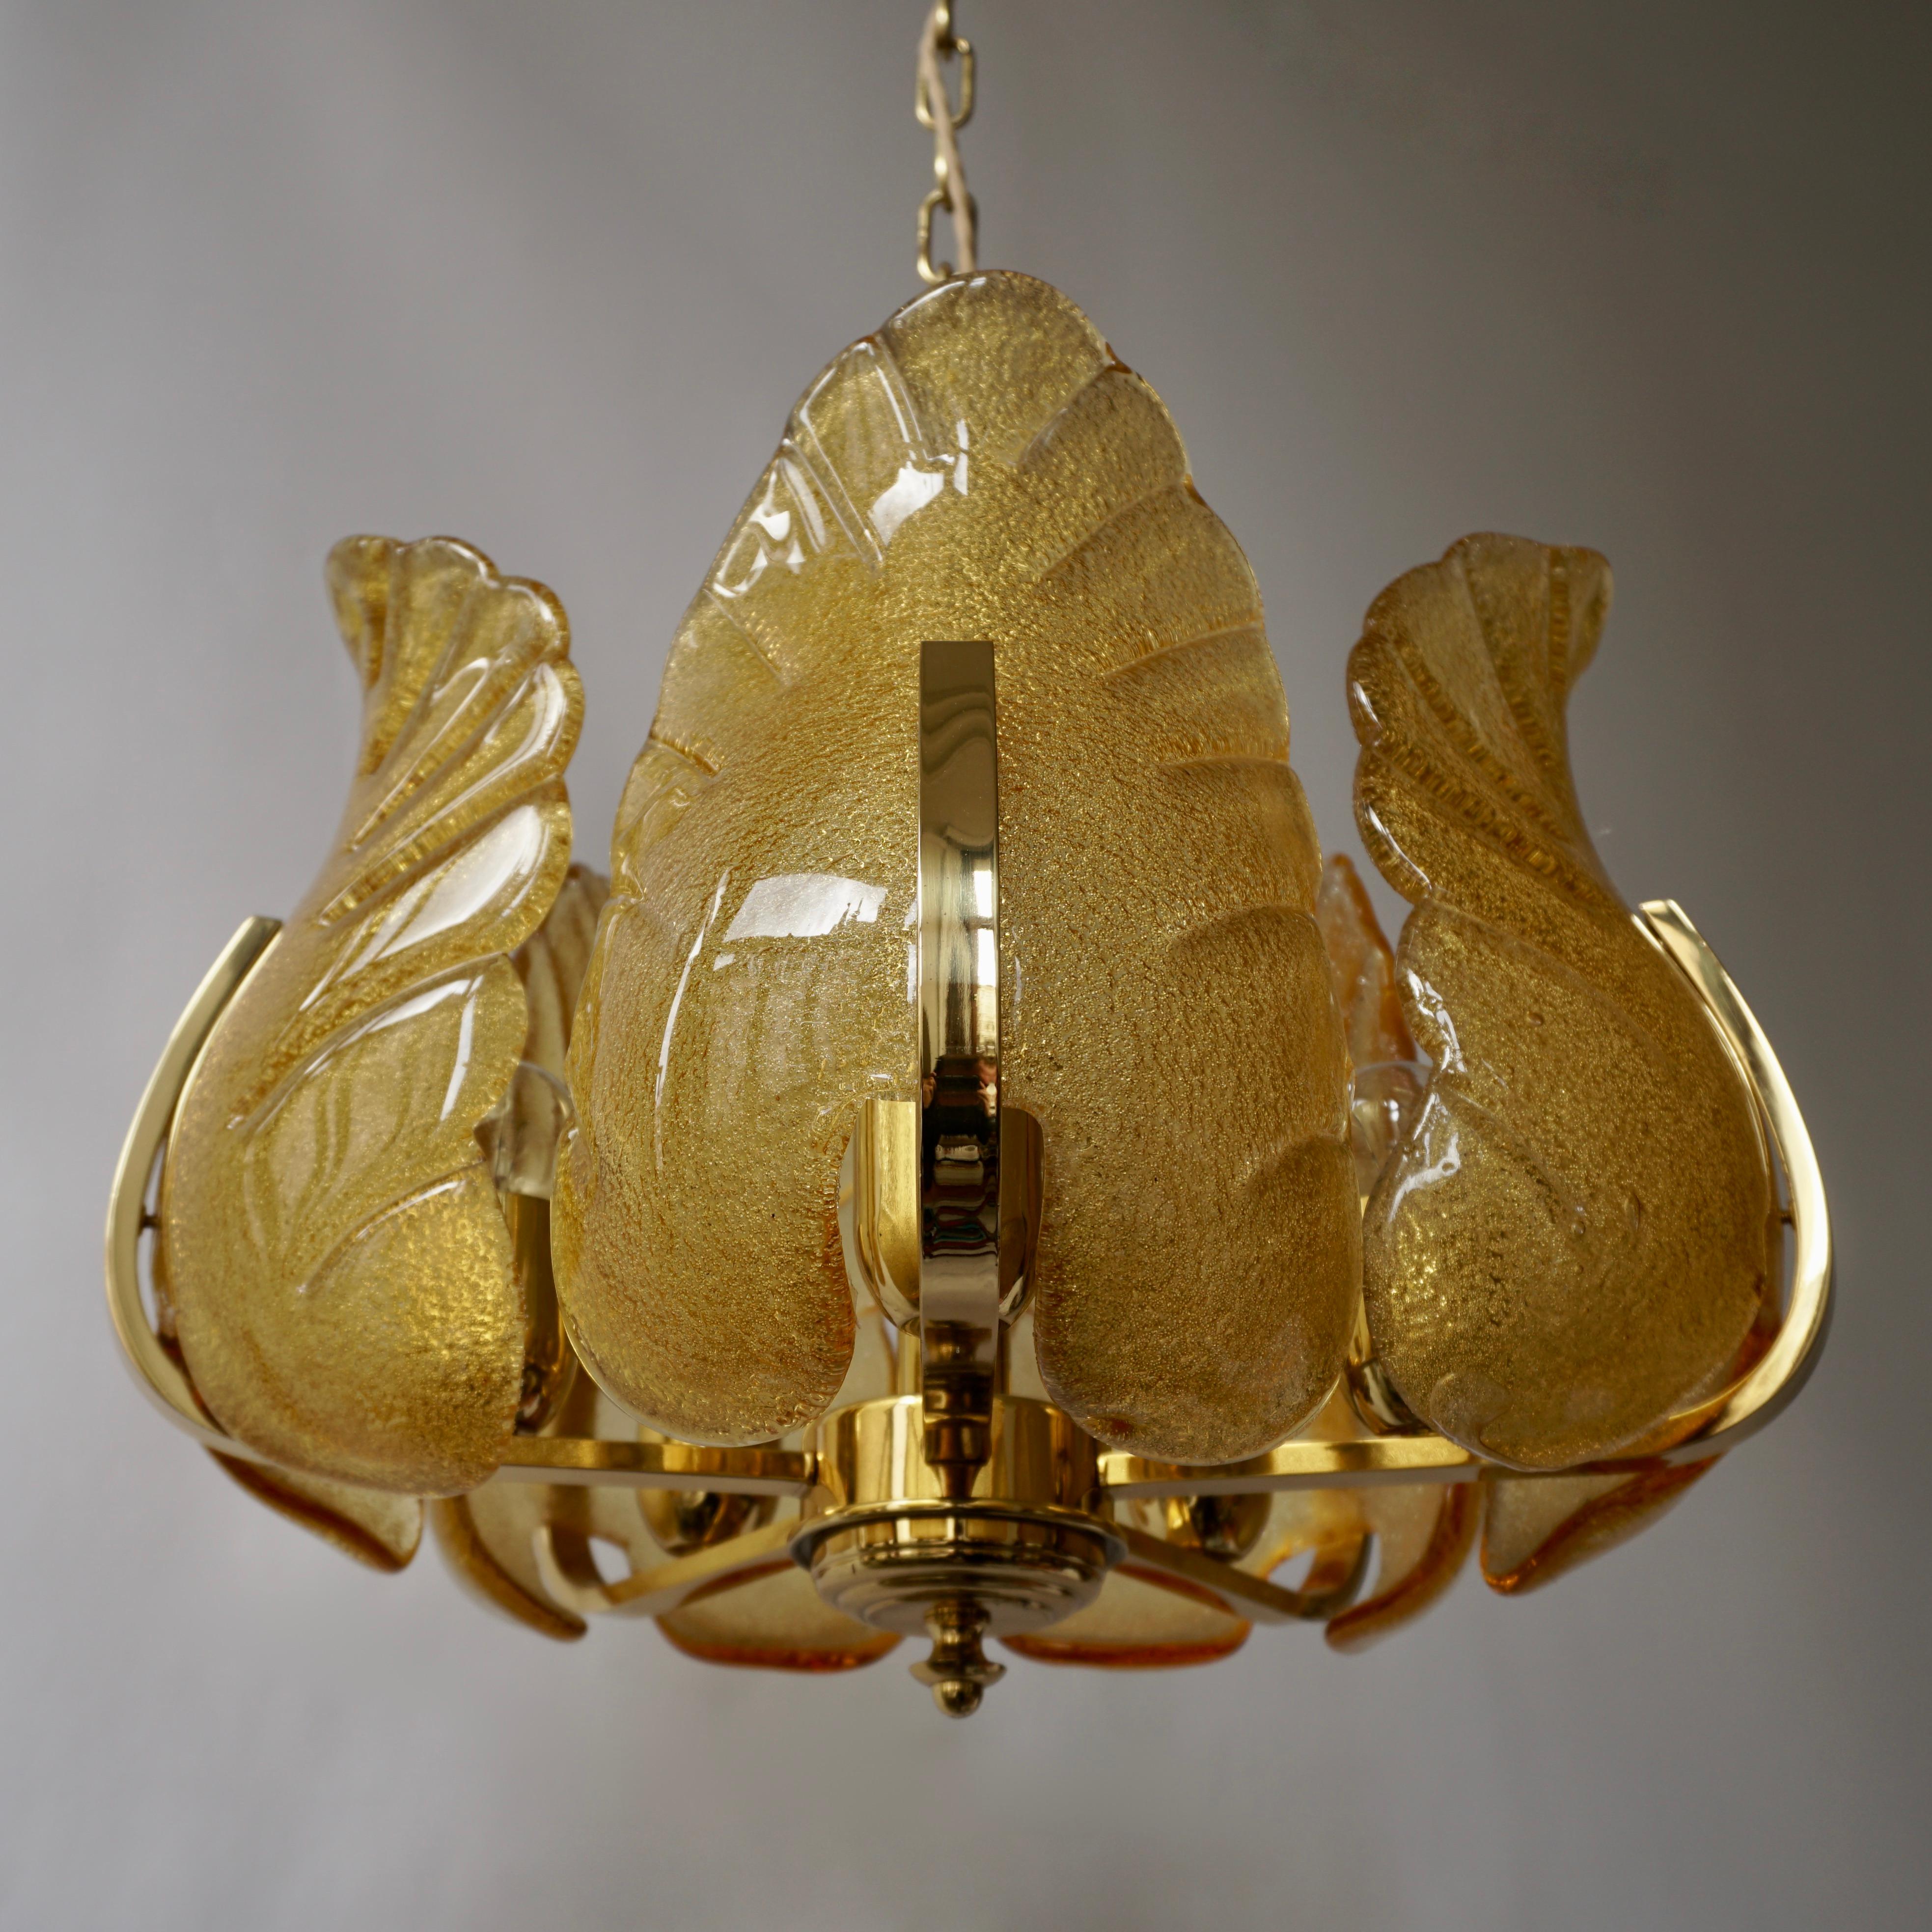 Italian amber Murano glass and brass chandelier.
Diameter 43 cm.
Height fixture 35 cm.
Total height including the chain and canopy 88 cm. 
The light requires five single E27 screw fit lightbulbs (60Watt max.)
Weight 8 kg.